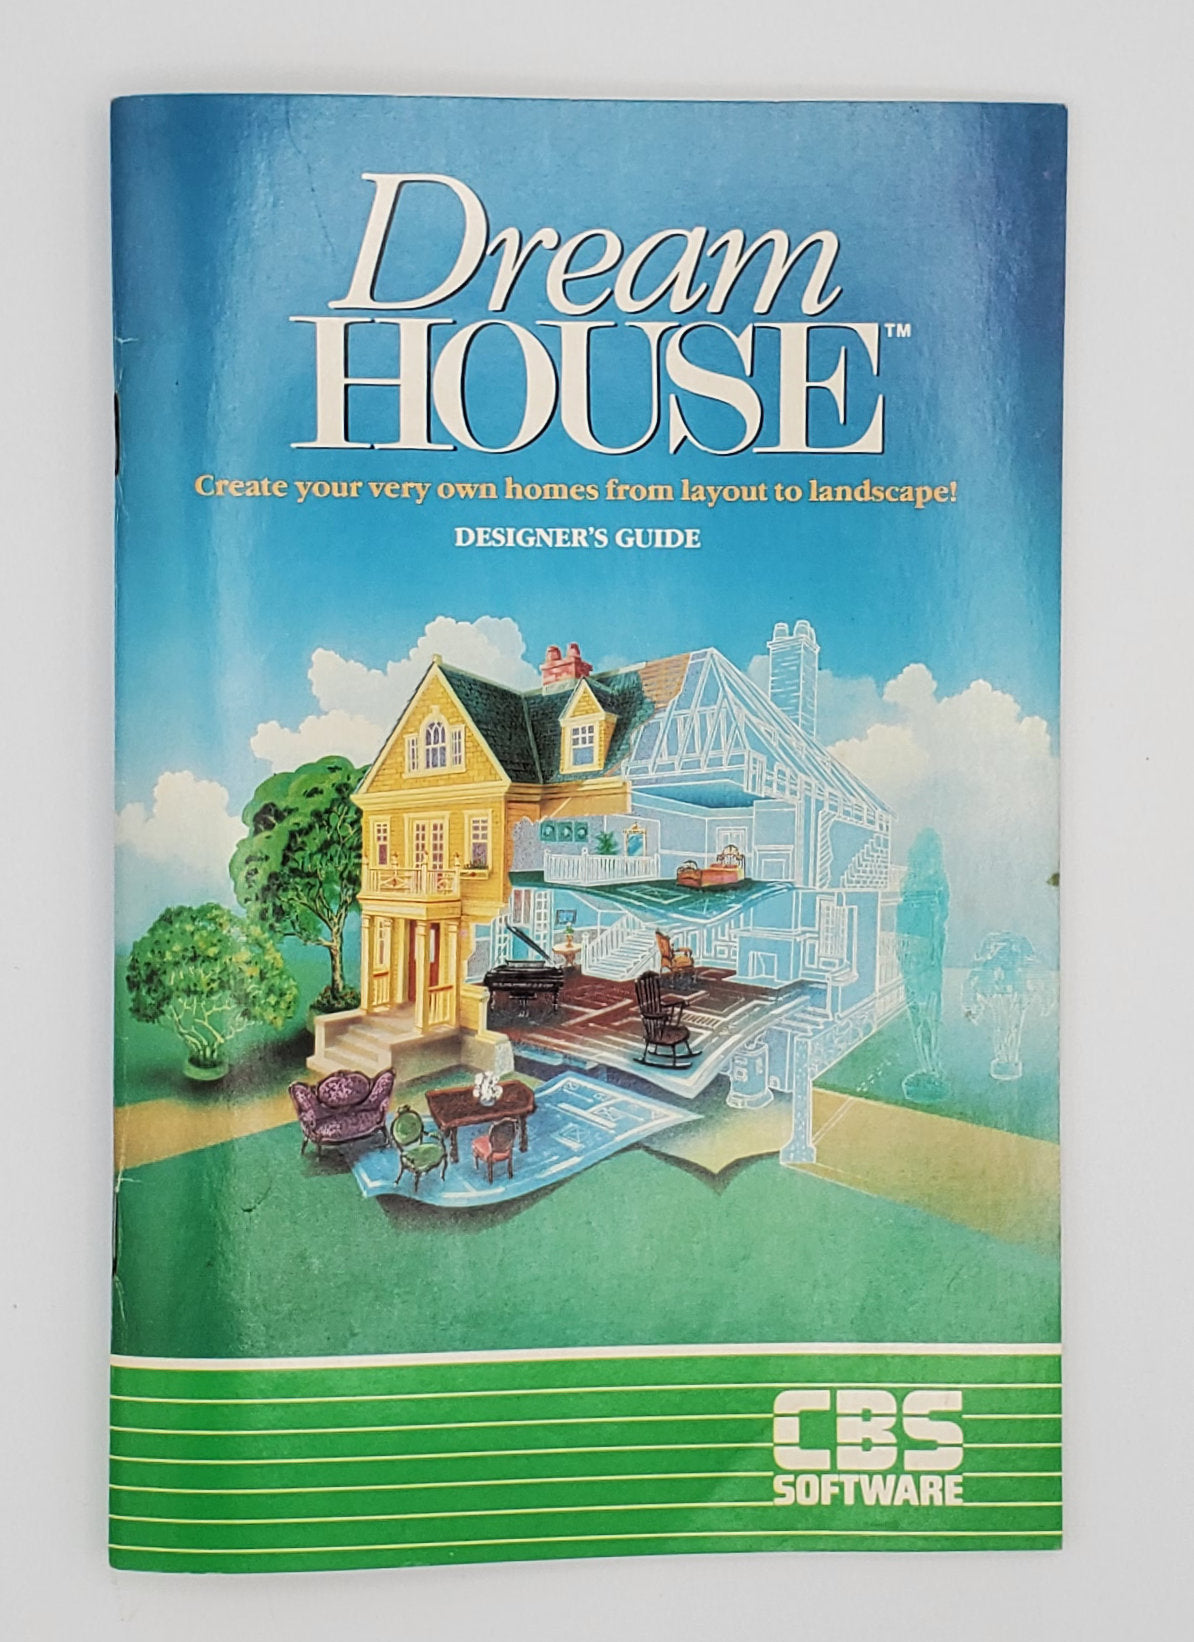 Dream House in Clamshell (Disk is Bad)